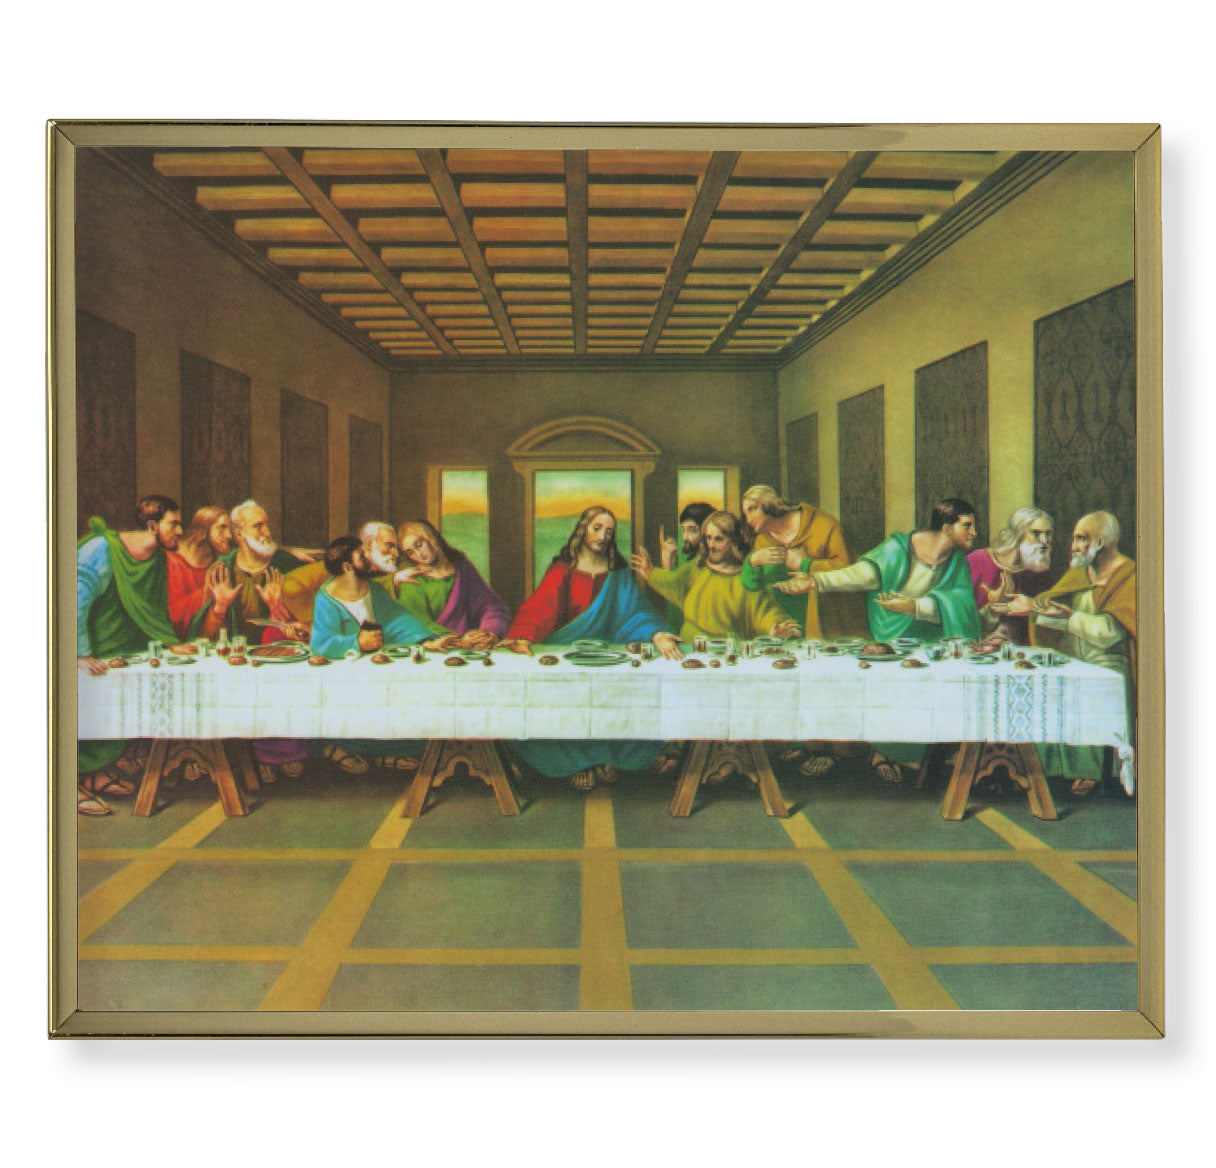 Last Supper Picture Framed Plaque Wall Art Decor, Medium, Bright Gold Finished Trimmed Plaque